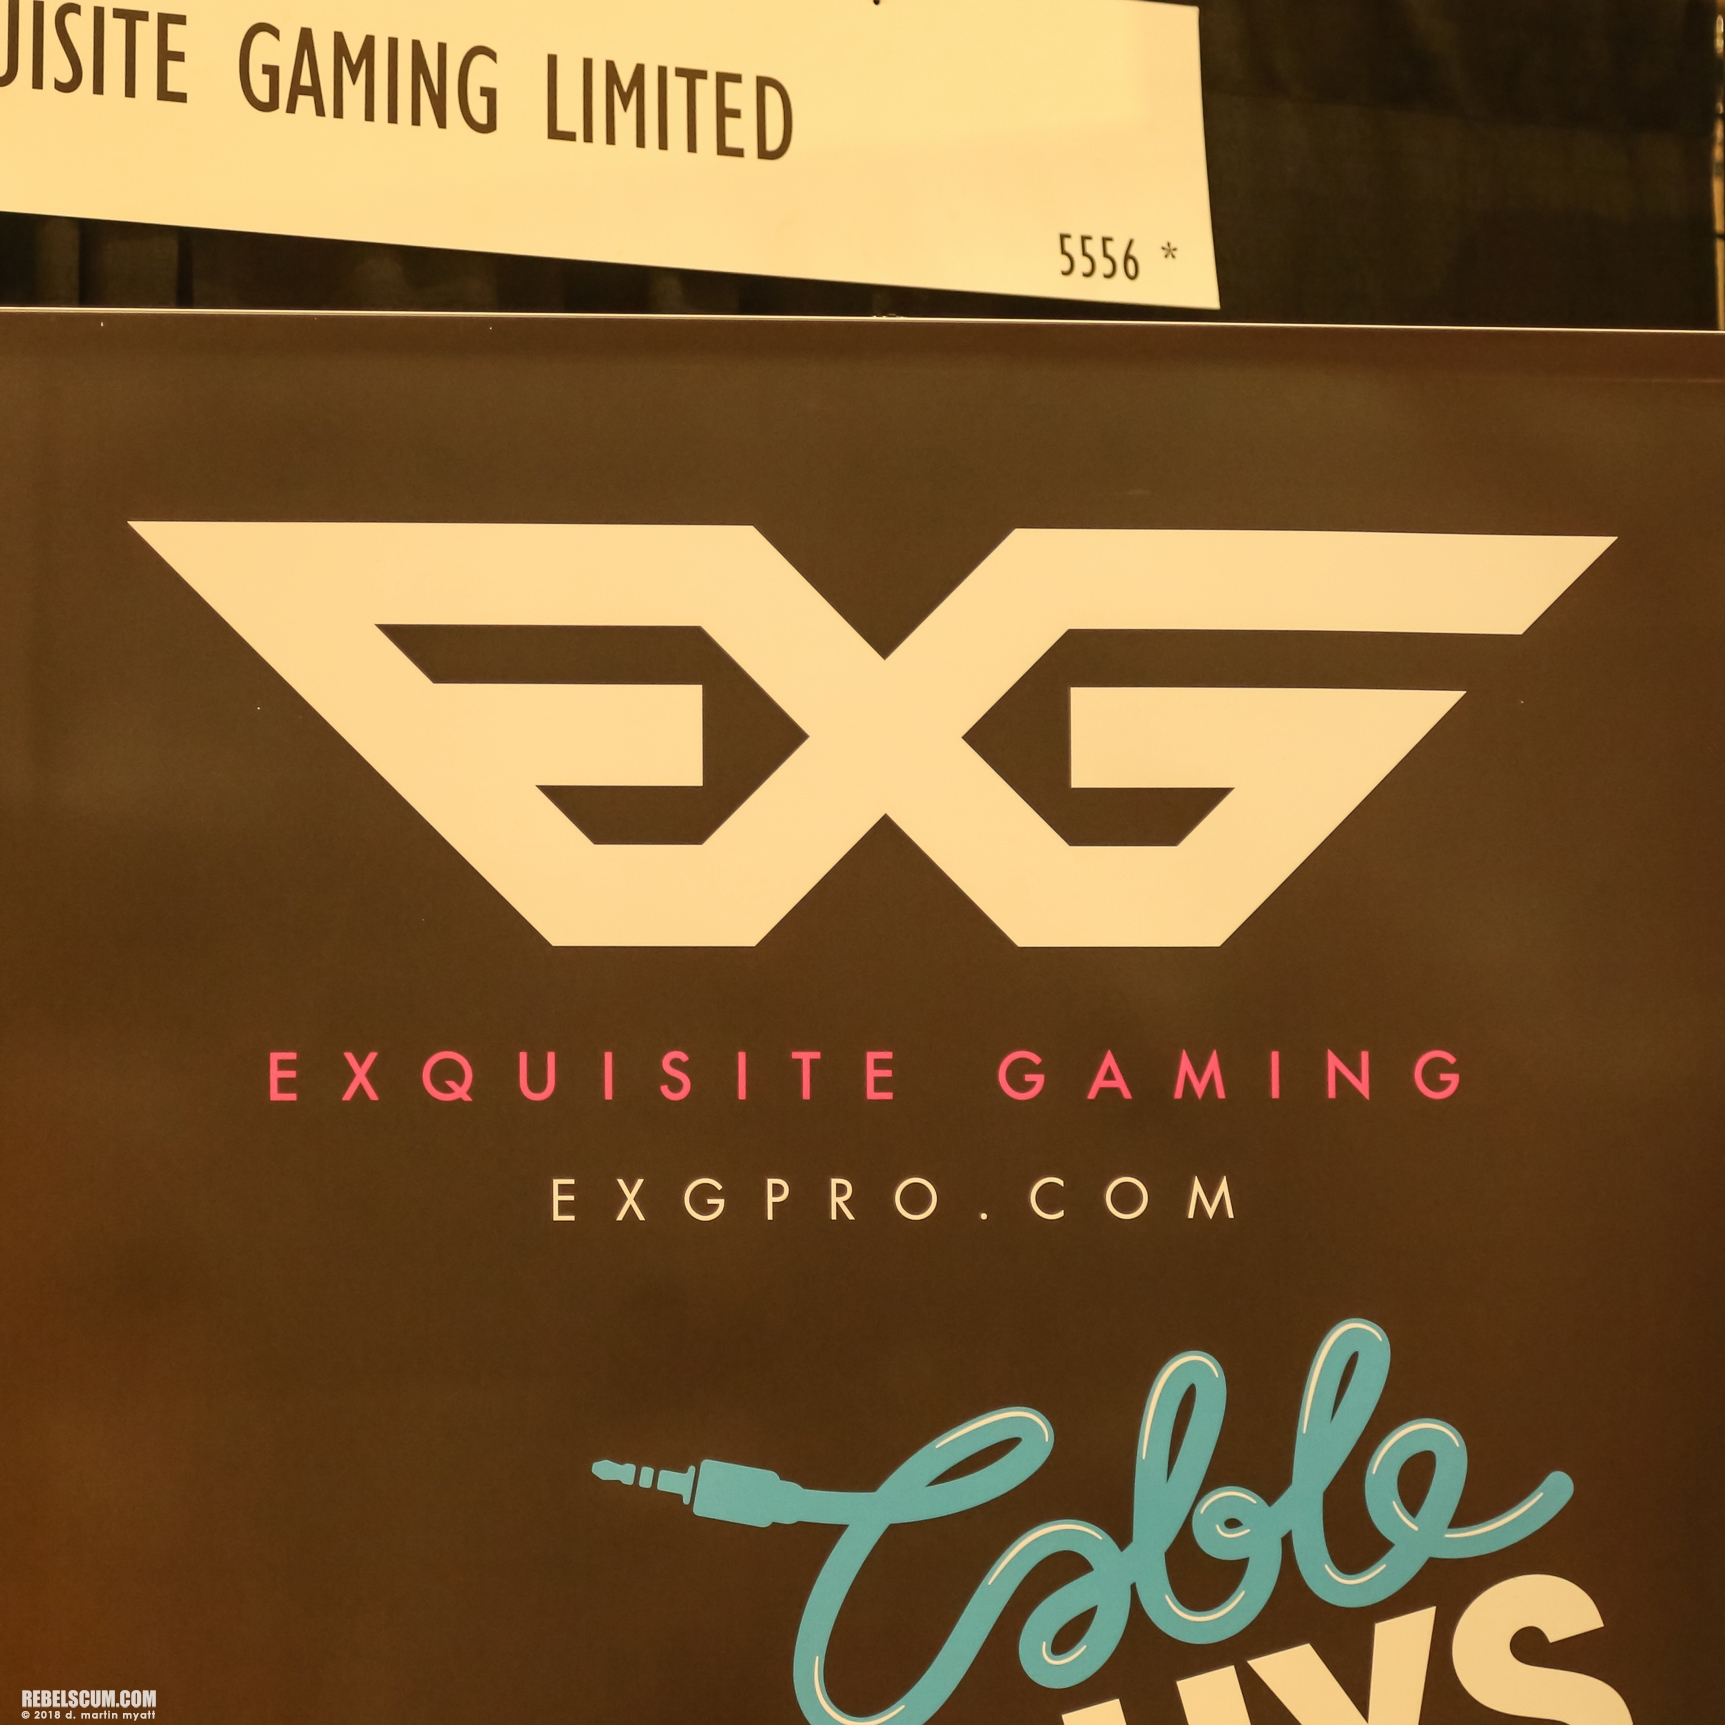 2018-International-Toy-Fair-Exquisite-Gaming-Limited-001.jpg